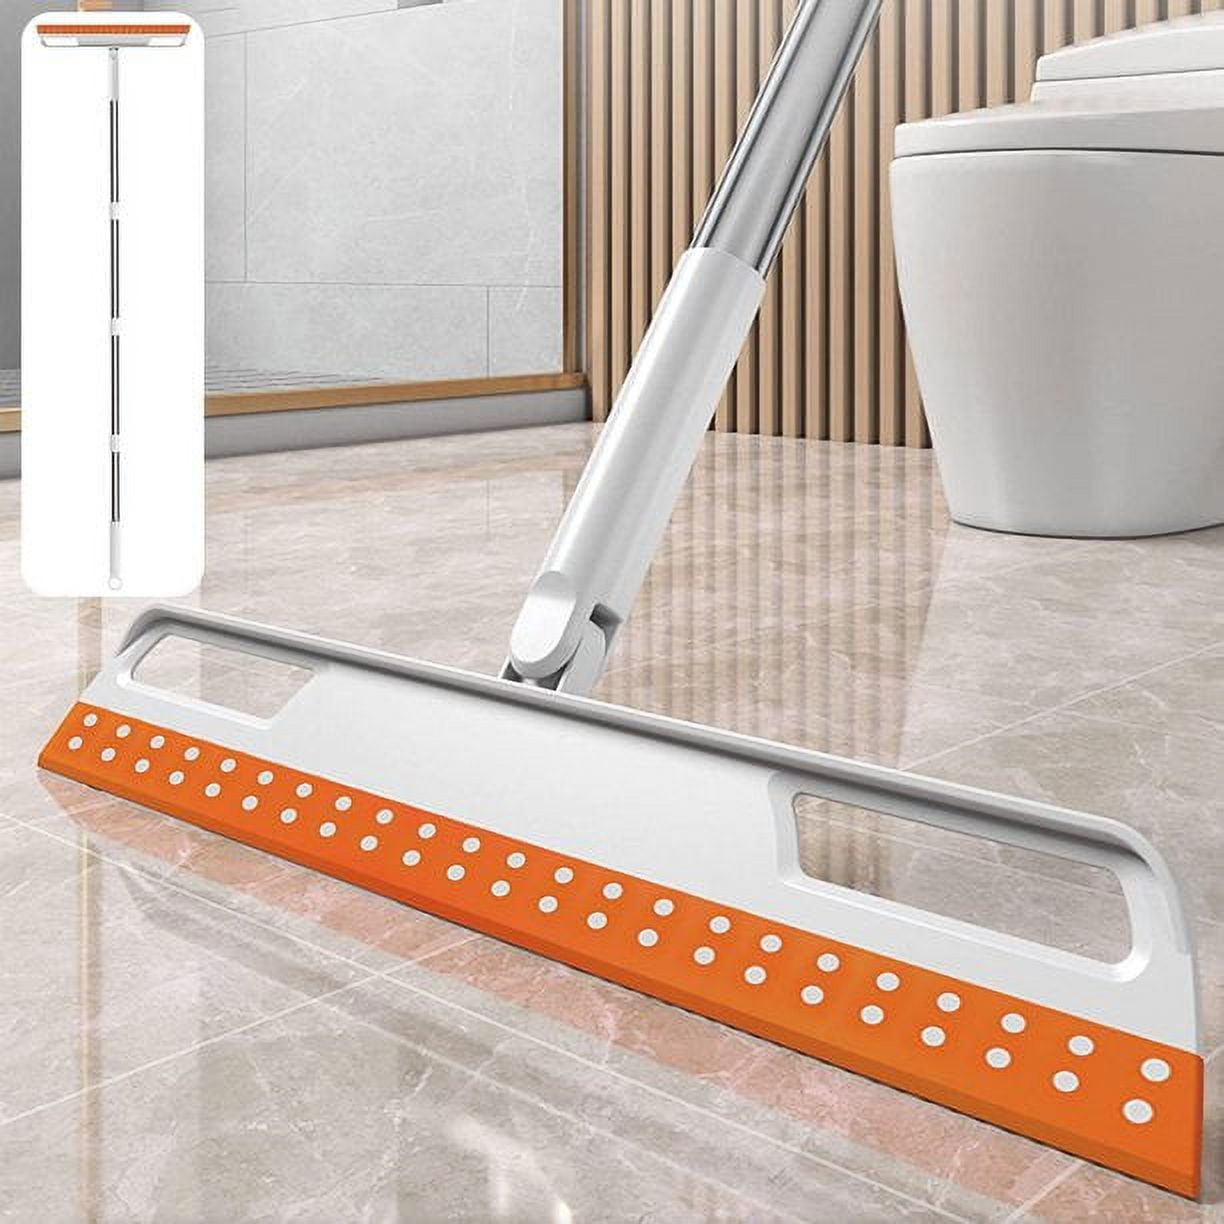  Nour Coating Squeegee - Disposable Epoxy Squeegee (1, 3/16  Notched) : Health & Household